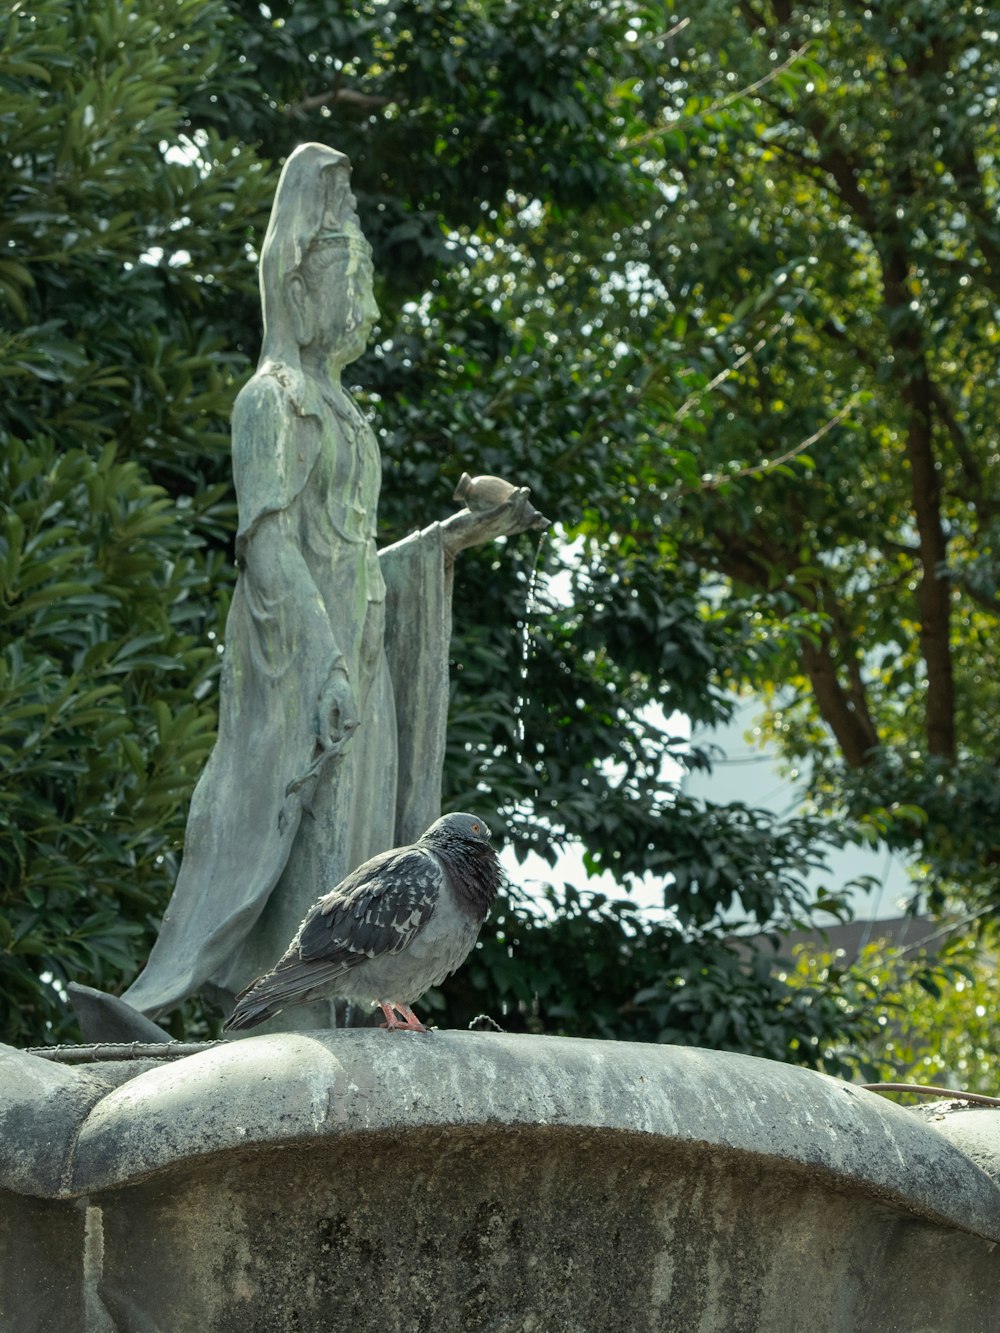 a bird is perched on the edge of a statue